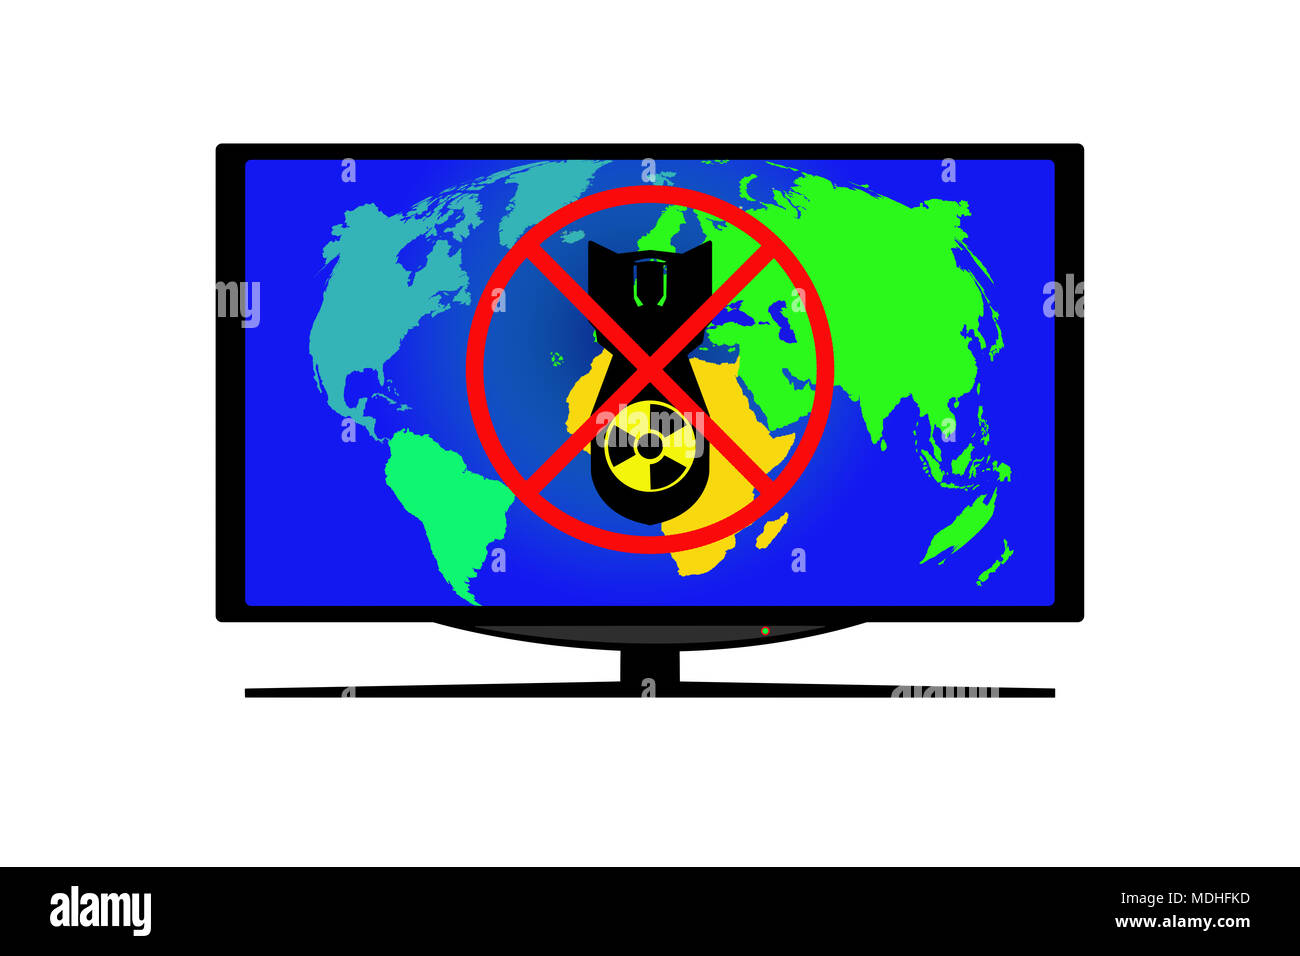 Monitor on white background. On the monitor screen is a world map and and crossed out the silhouette of an atomic bomb Stock Photo